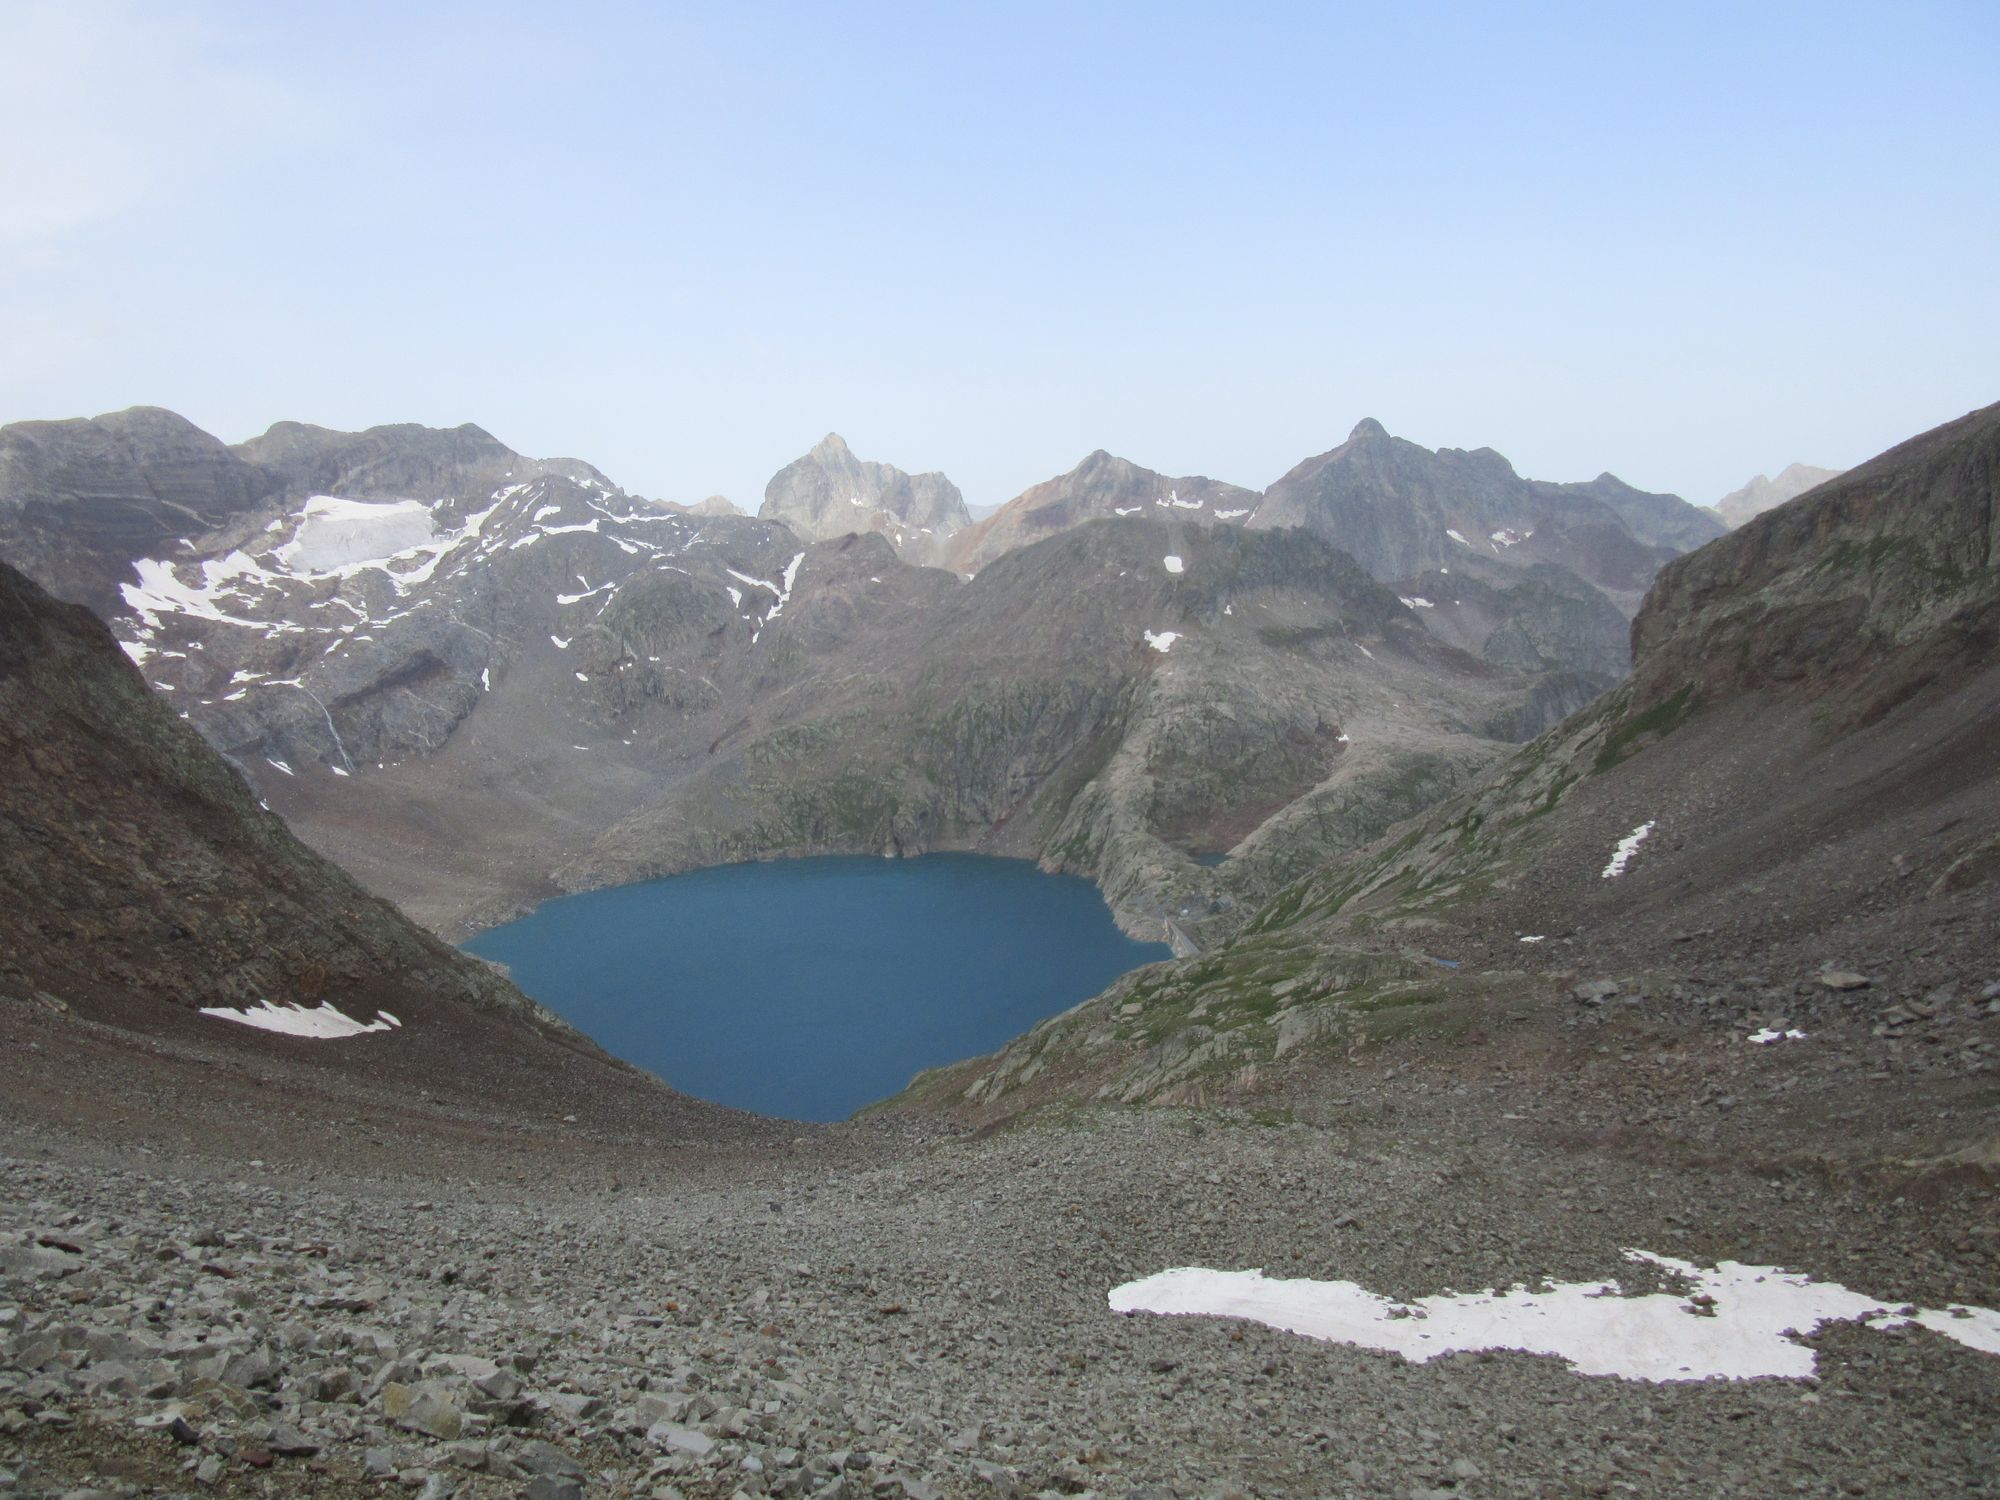 Descending from Col Inferieur de Literole towards Lac du Portillon (dam and refuge just visible to right); Gourgs-Blancs visible beyond.